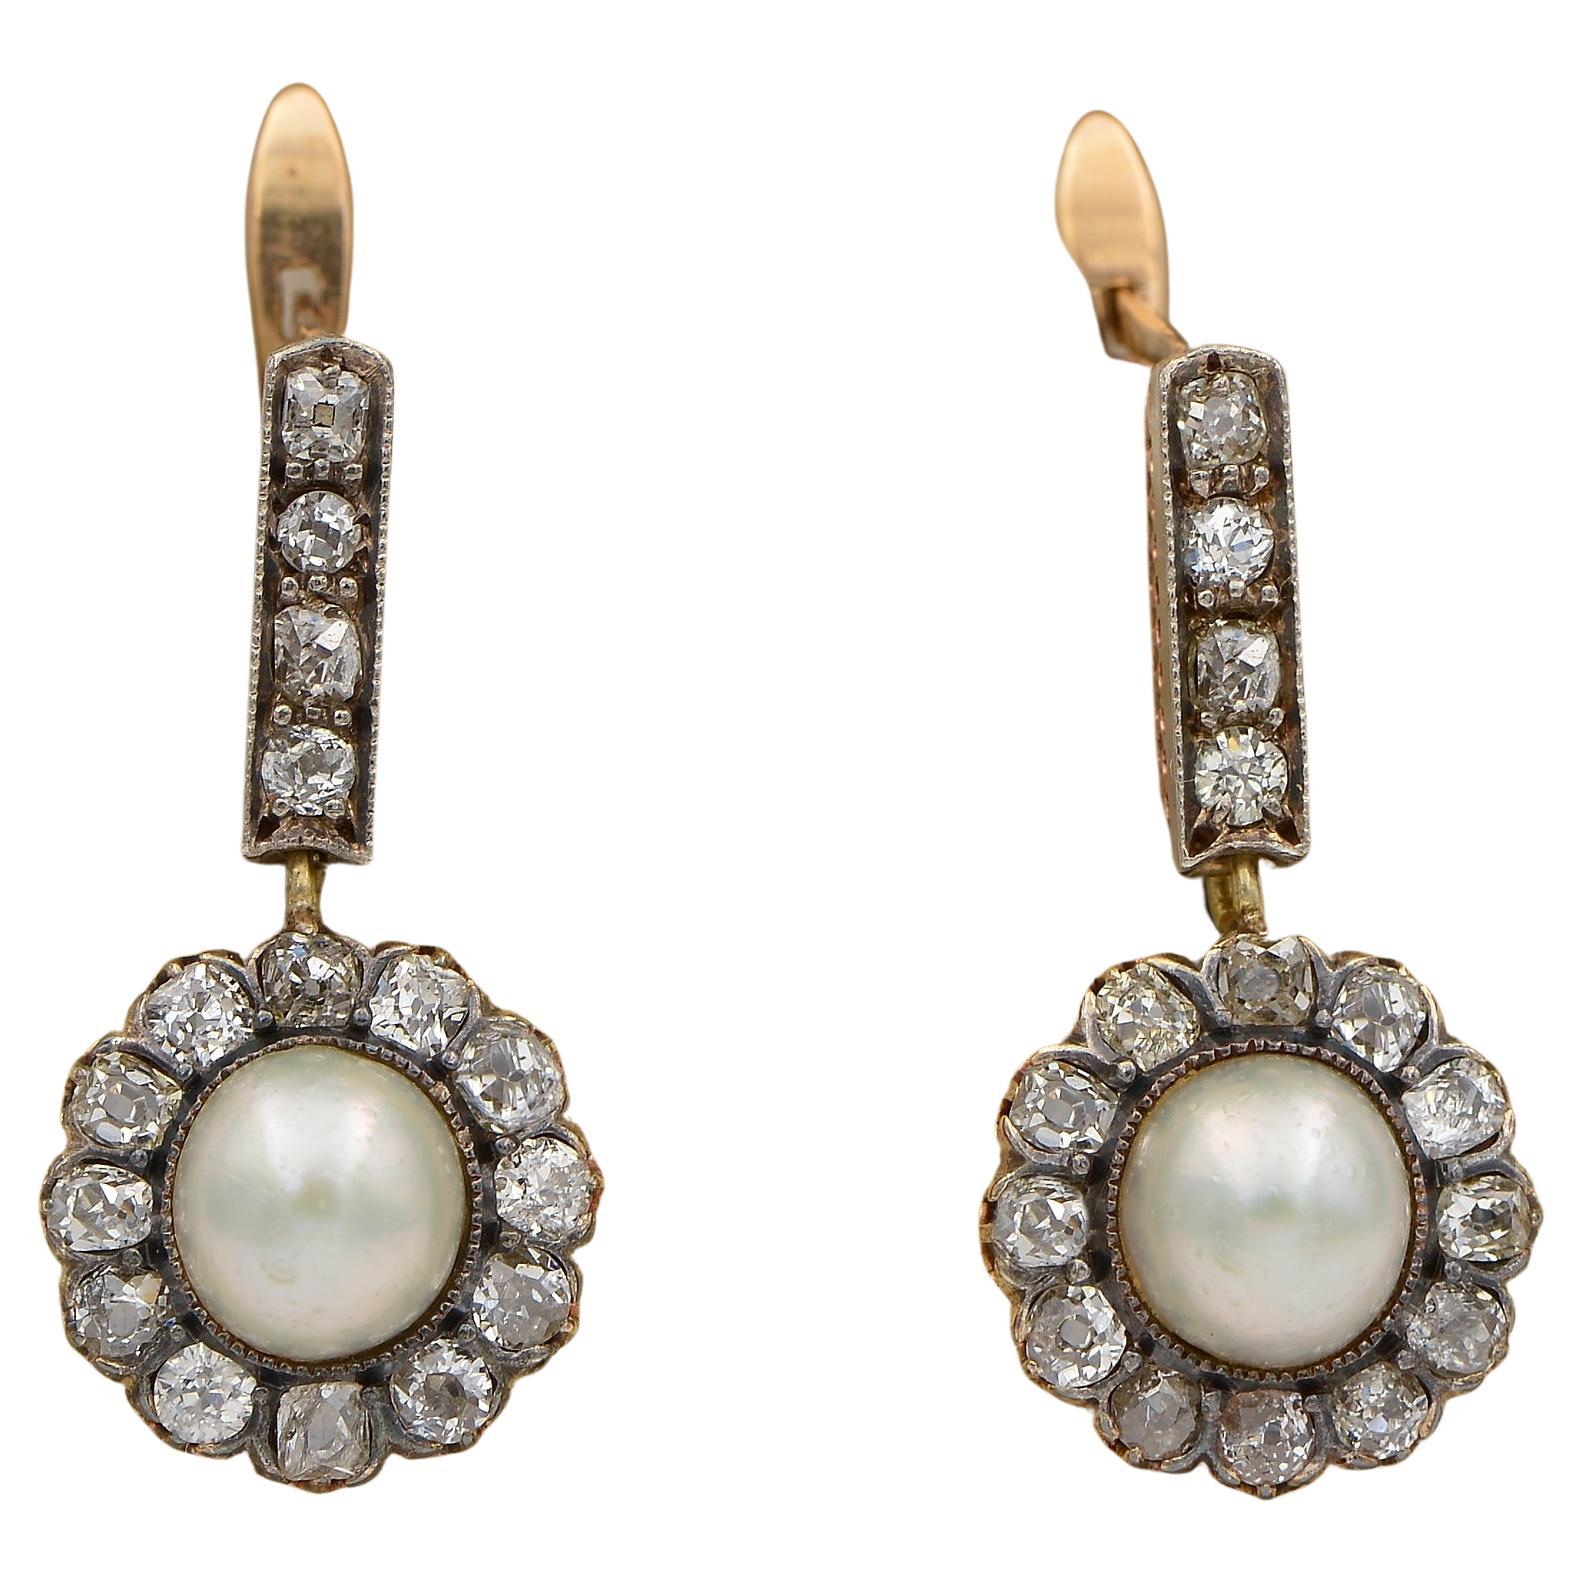 Pair of delicate pearl earrings with diamonds. 750/- whi… | Drouot.com